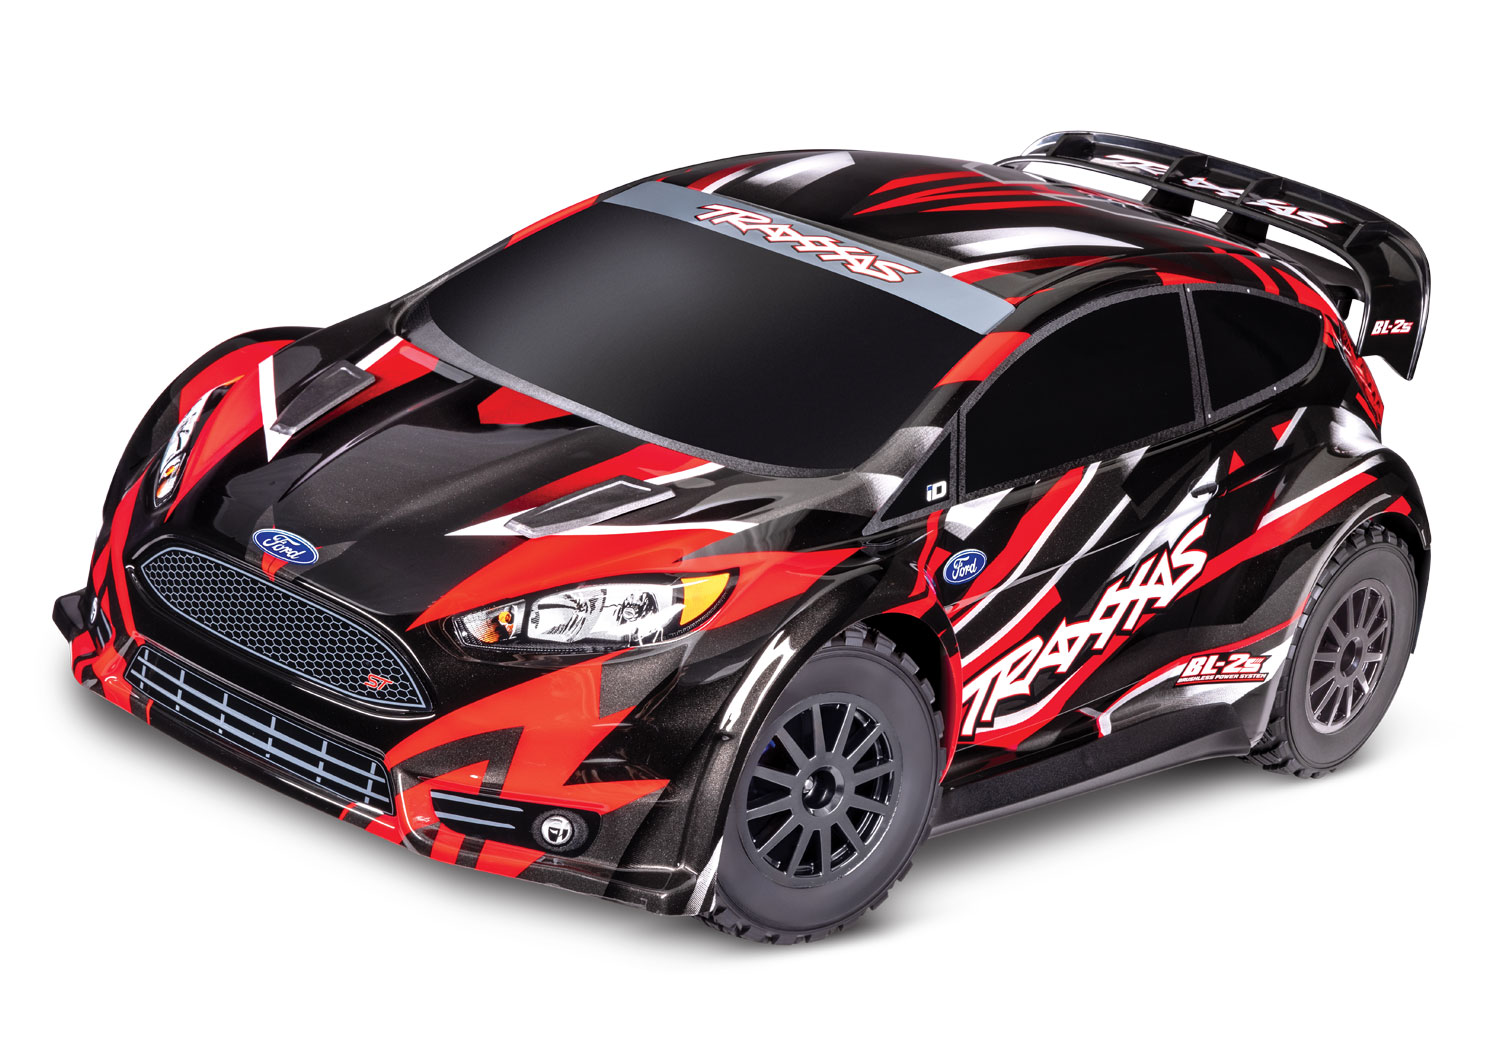 TRAXXAS FIESTA ST RALLY 4X4 BL-2S BRUSHLESS Rouge